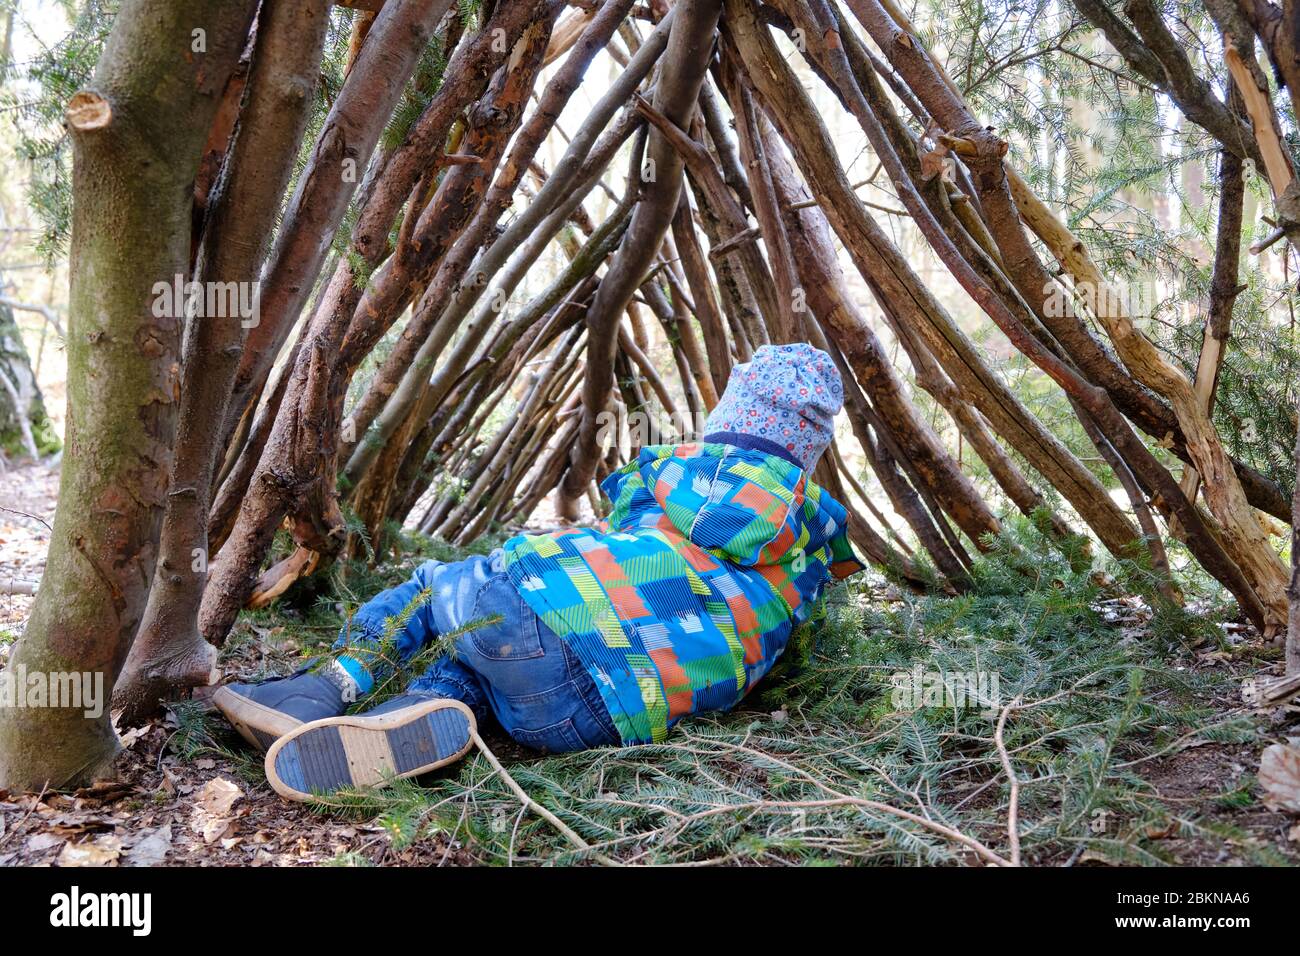 Rear view of 4 year old caucasian child lying in a teepee in the forest made of branches and wooden sticks from the forest. Seen in Germany in April. Stock Photo